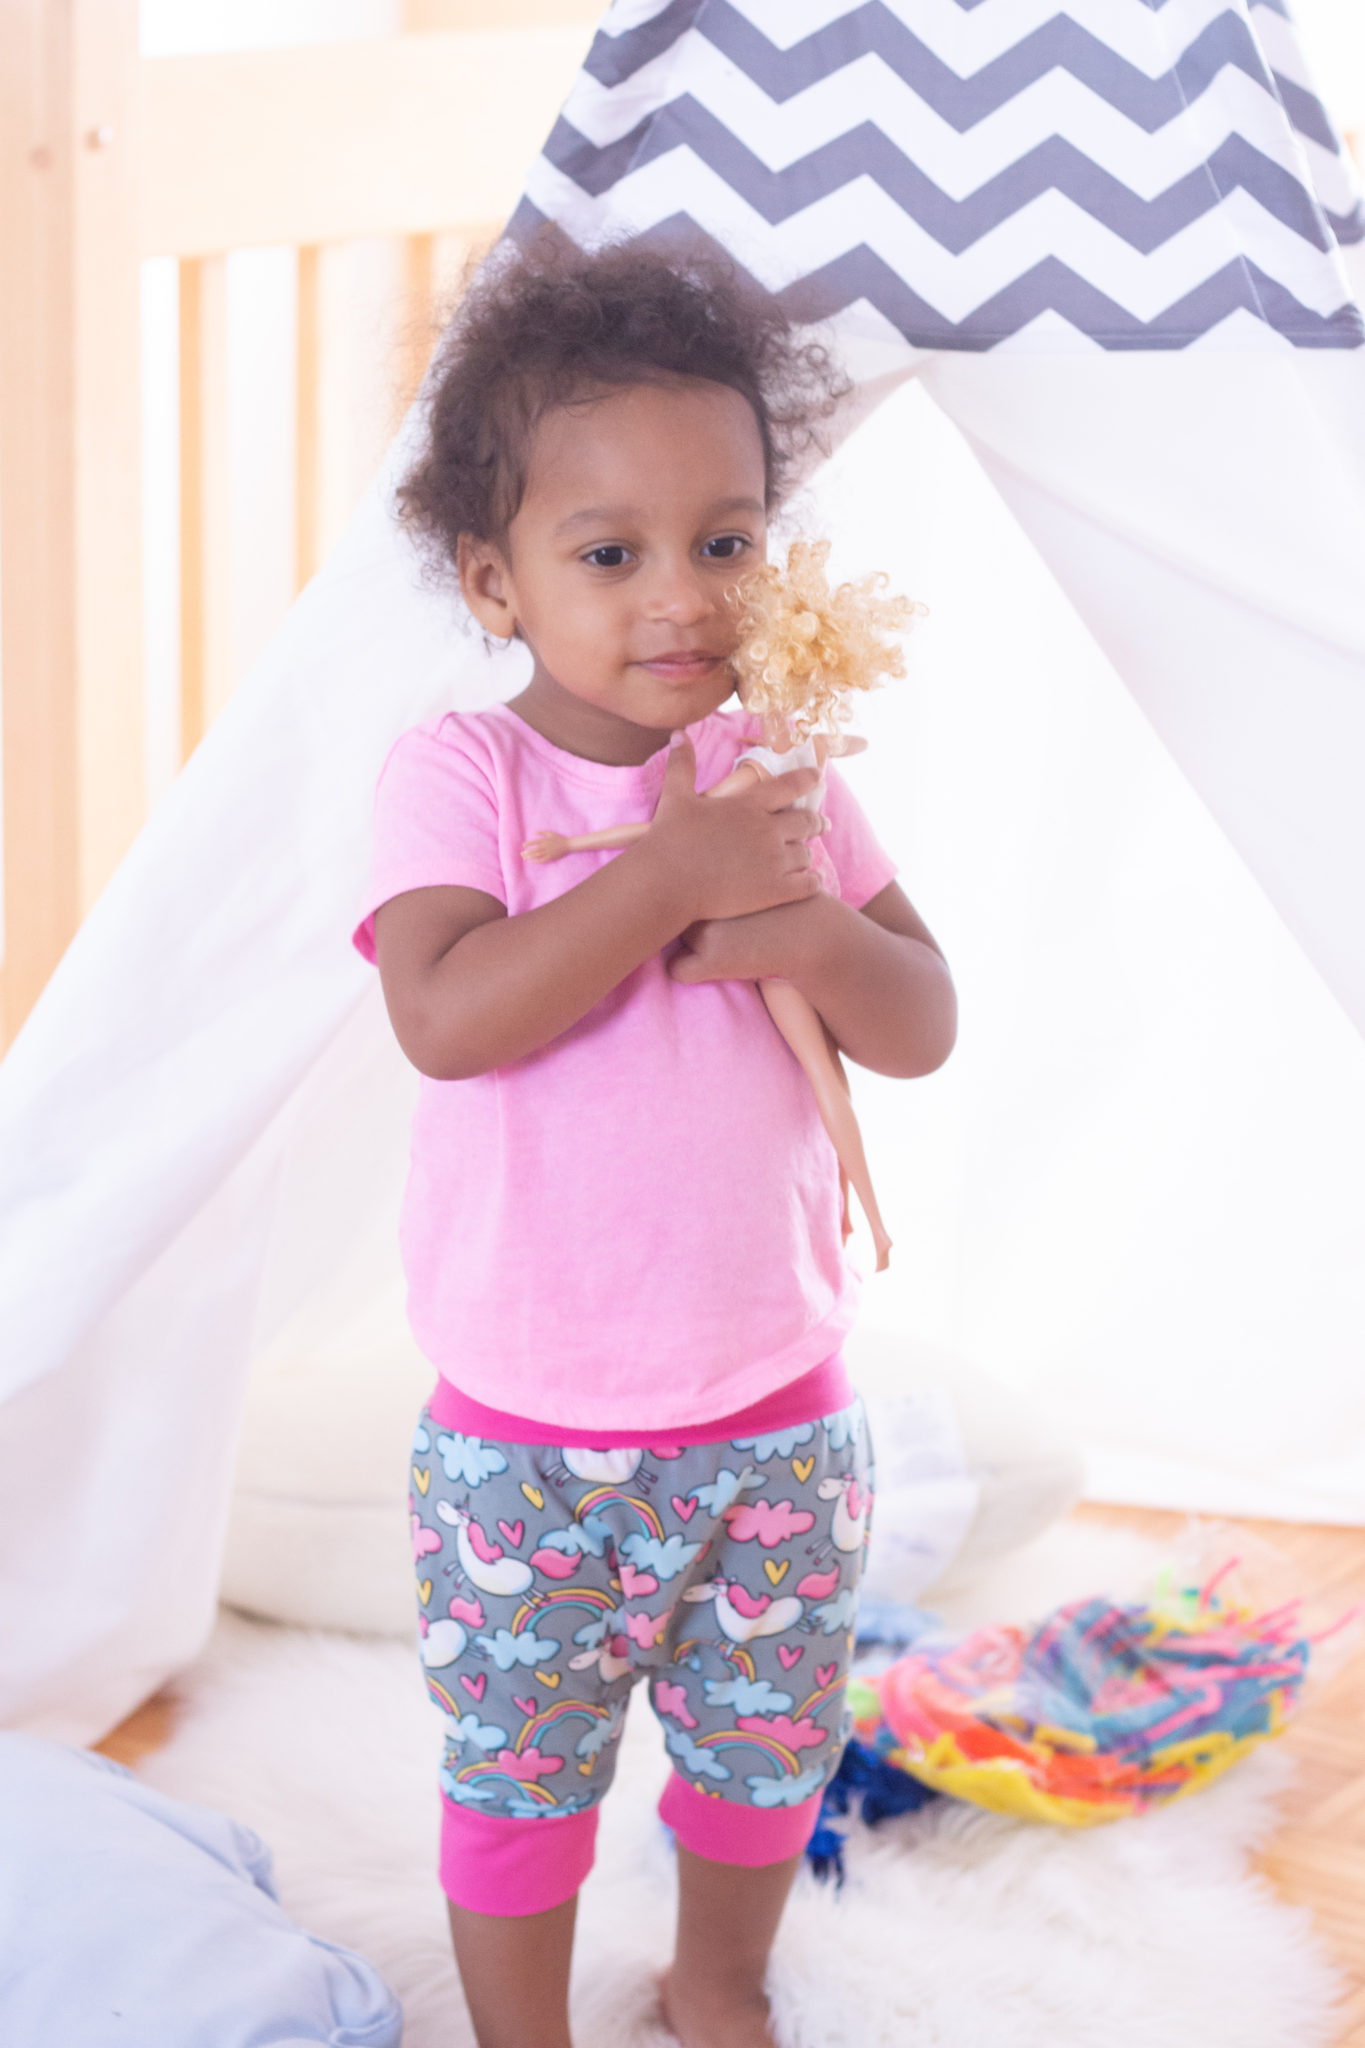 How To Encourage Independent Play In Toddlers | Philips Avent Digital Monitor